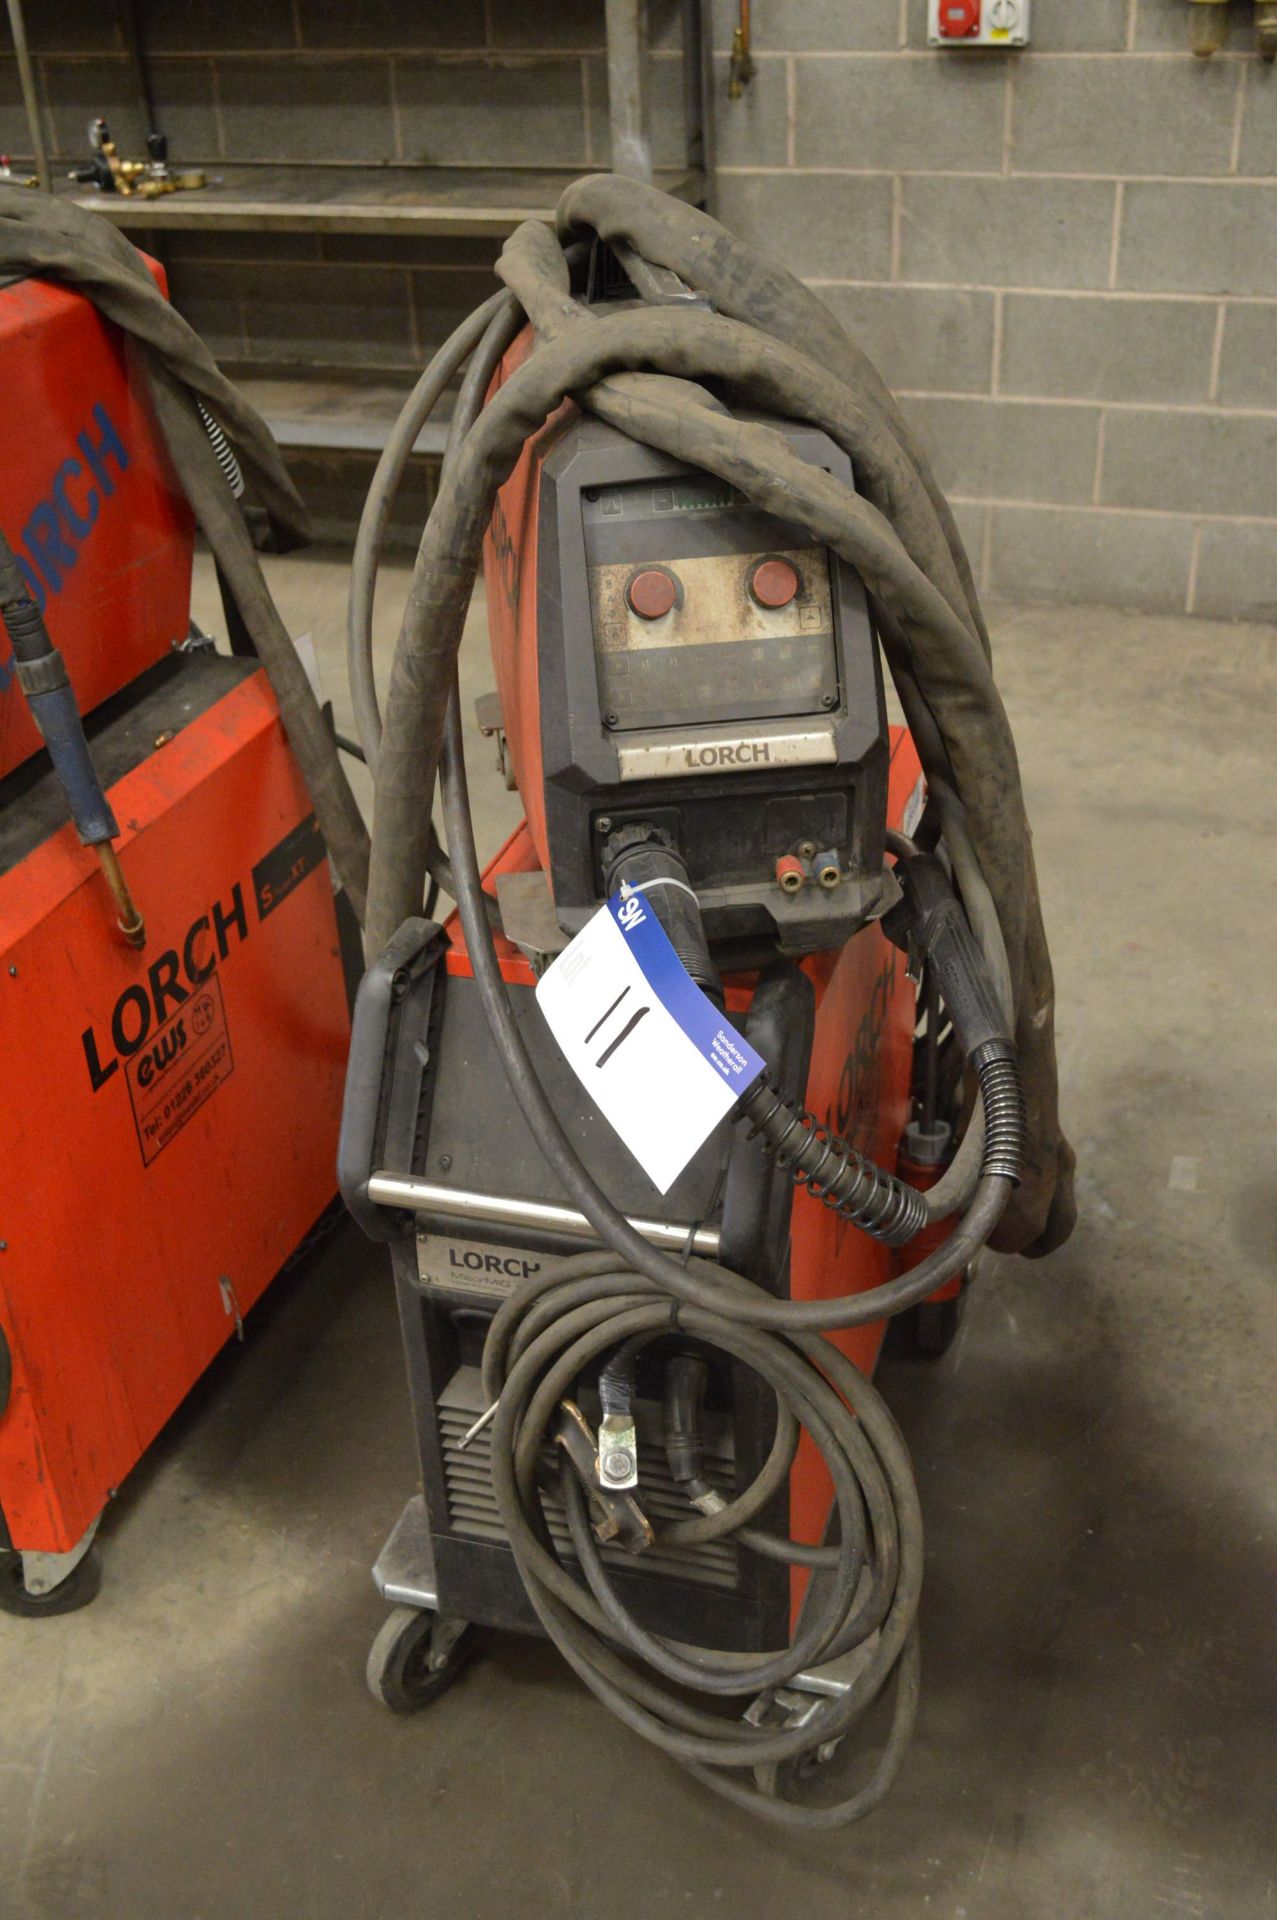 Lorch Micormig 400 Mig Welding Rectifier, serial no. 4062-2631-0004-6, with wire feed unit